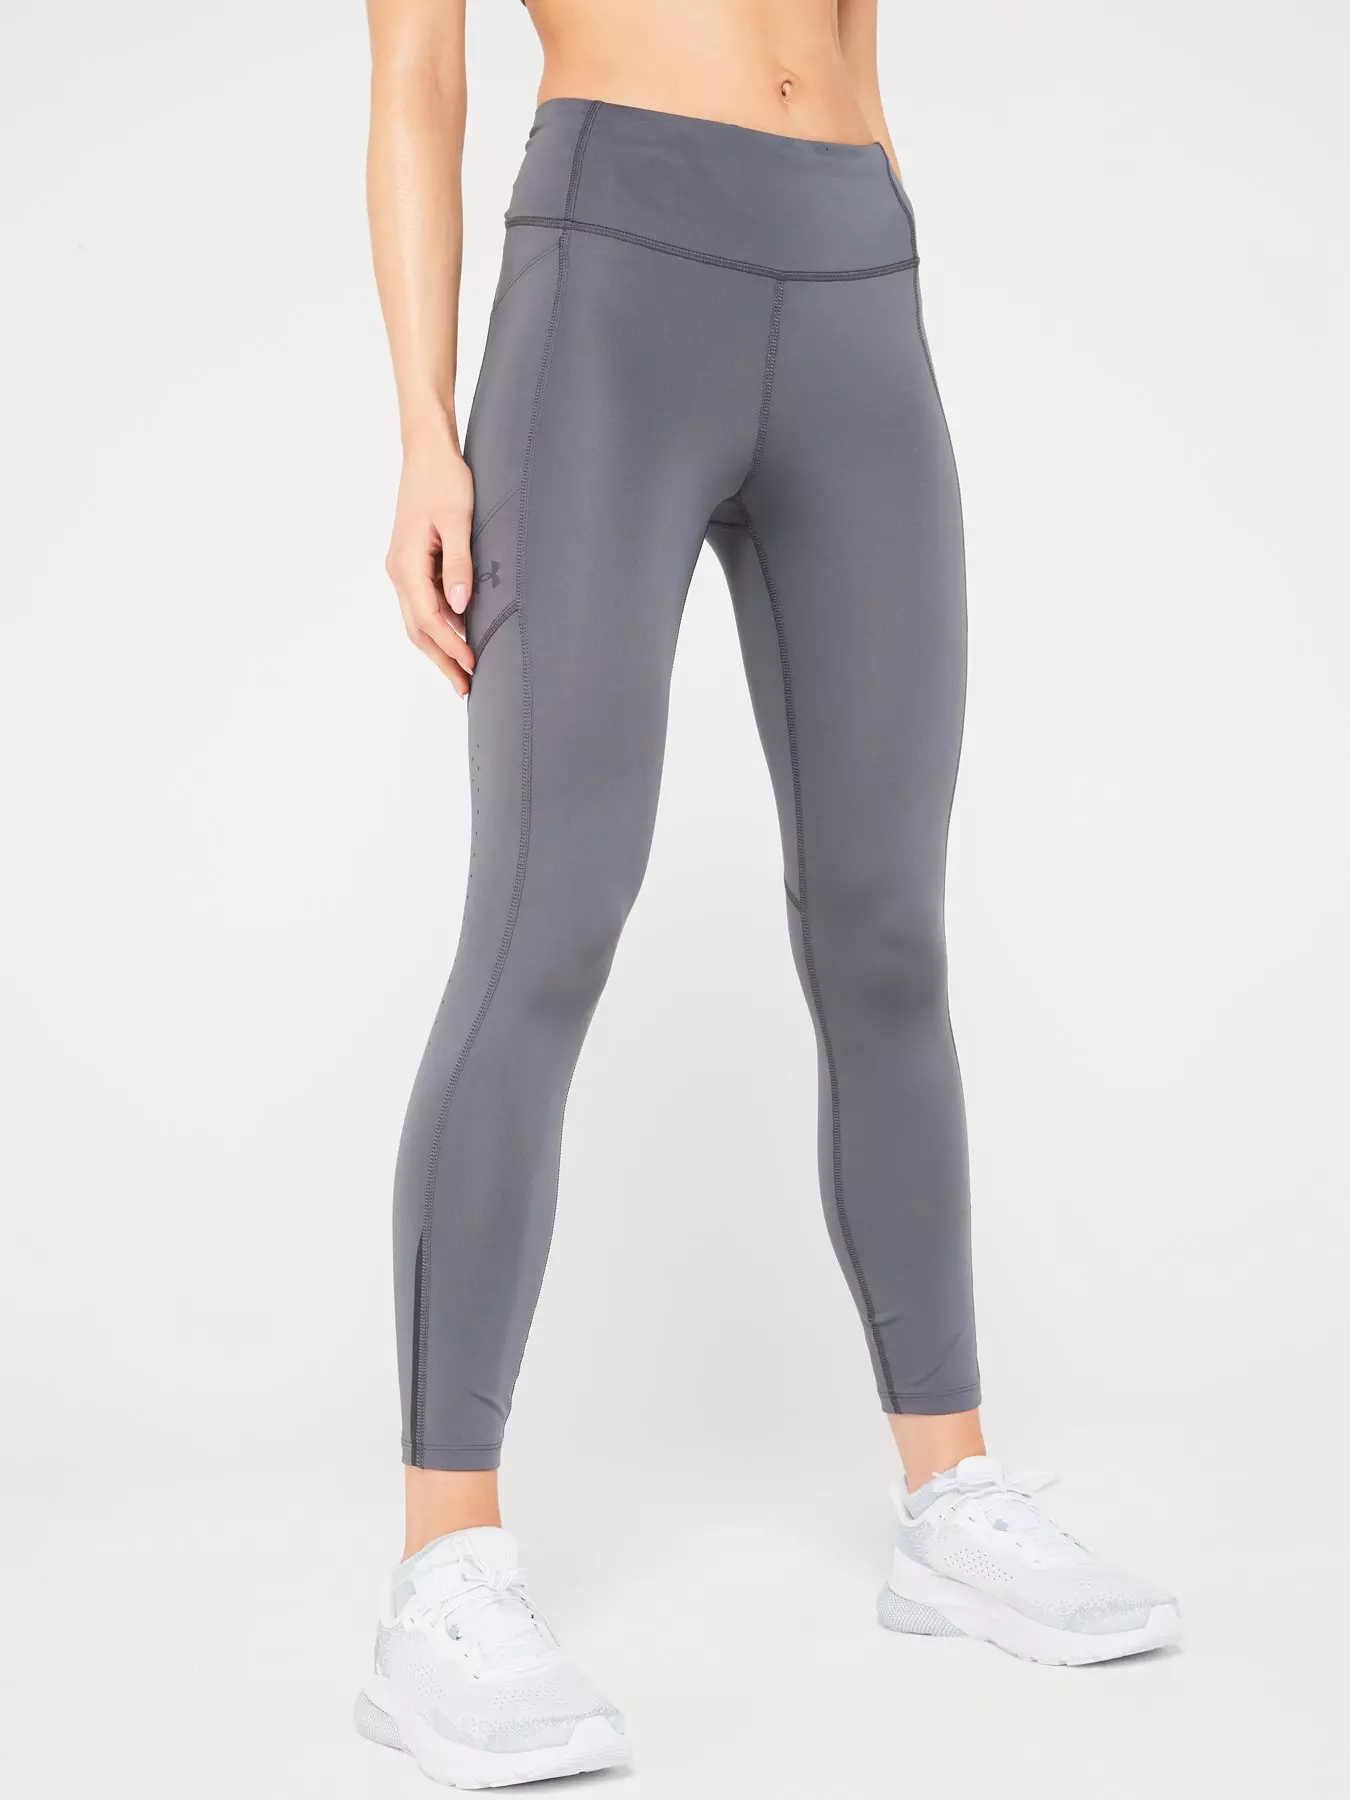 Under Armour Leggings - Armor - Hydro Teal » Quick Shipping